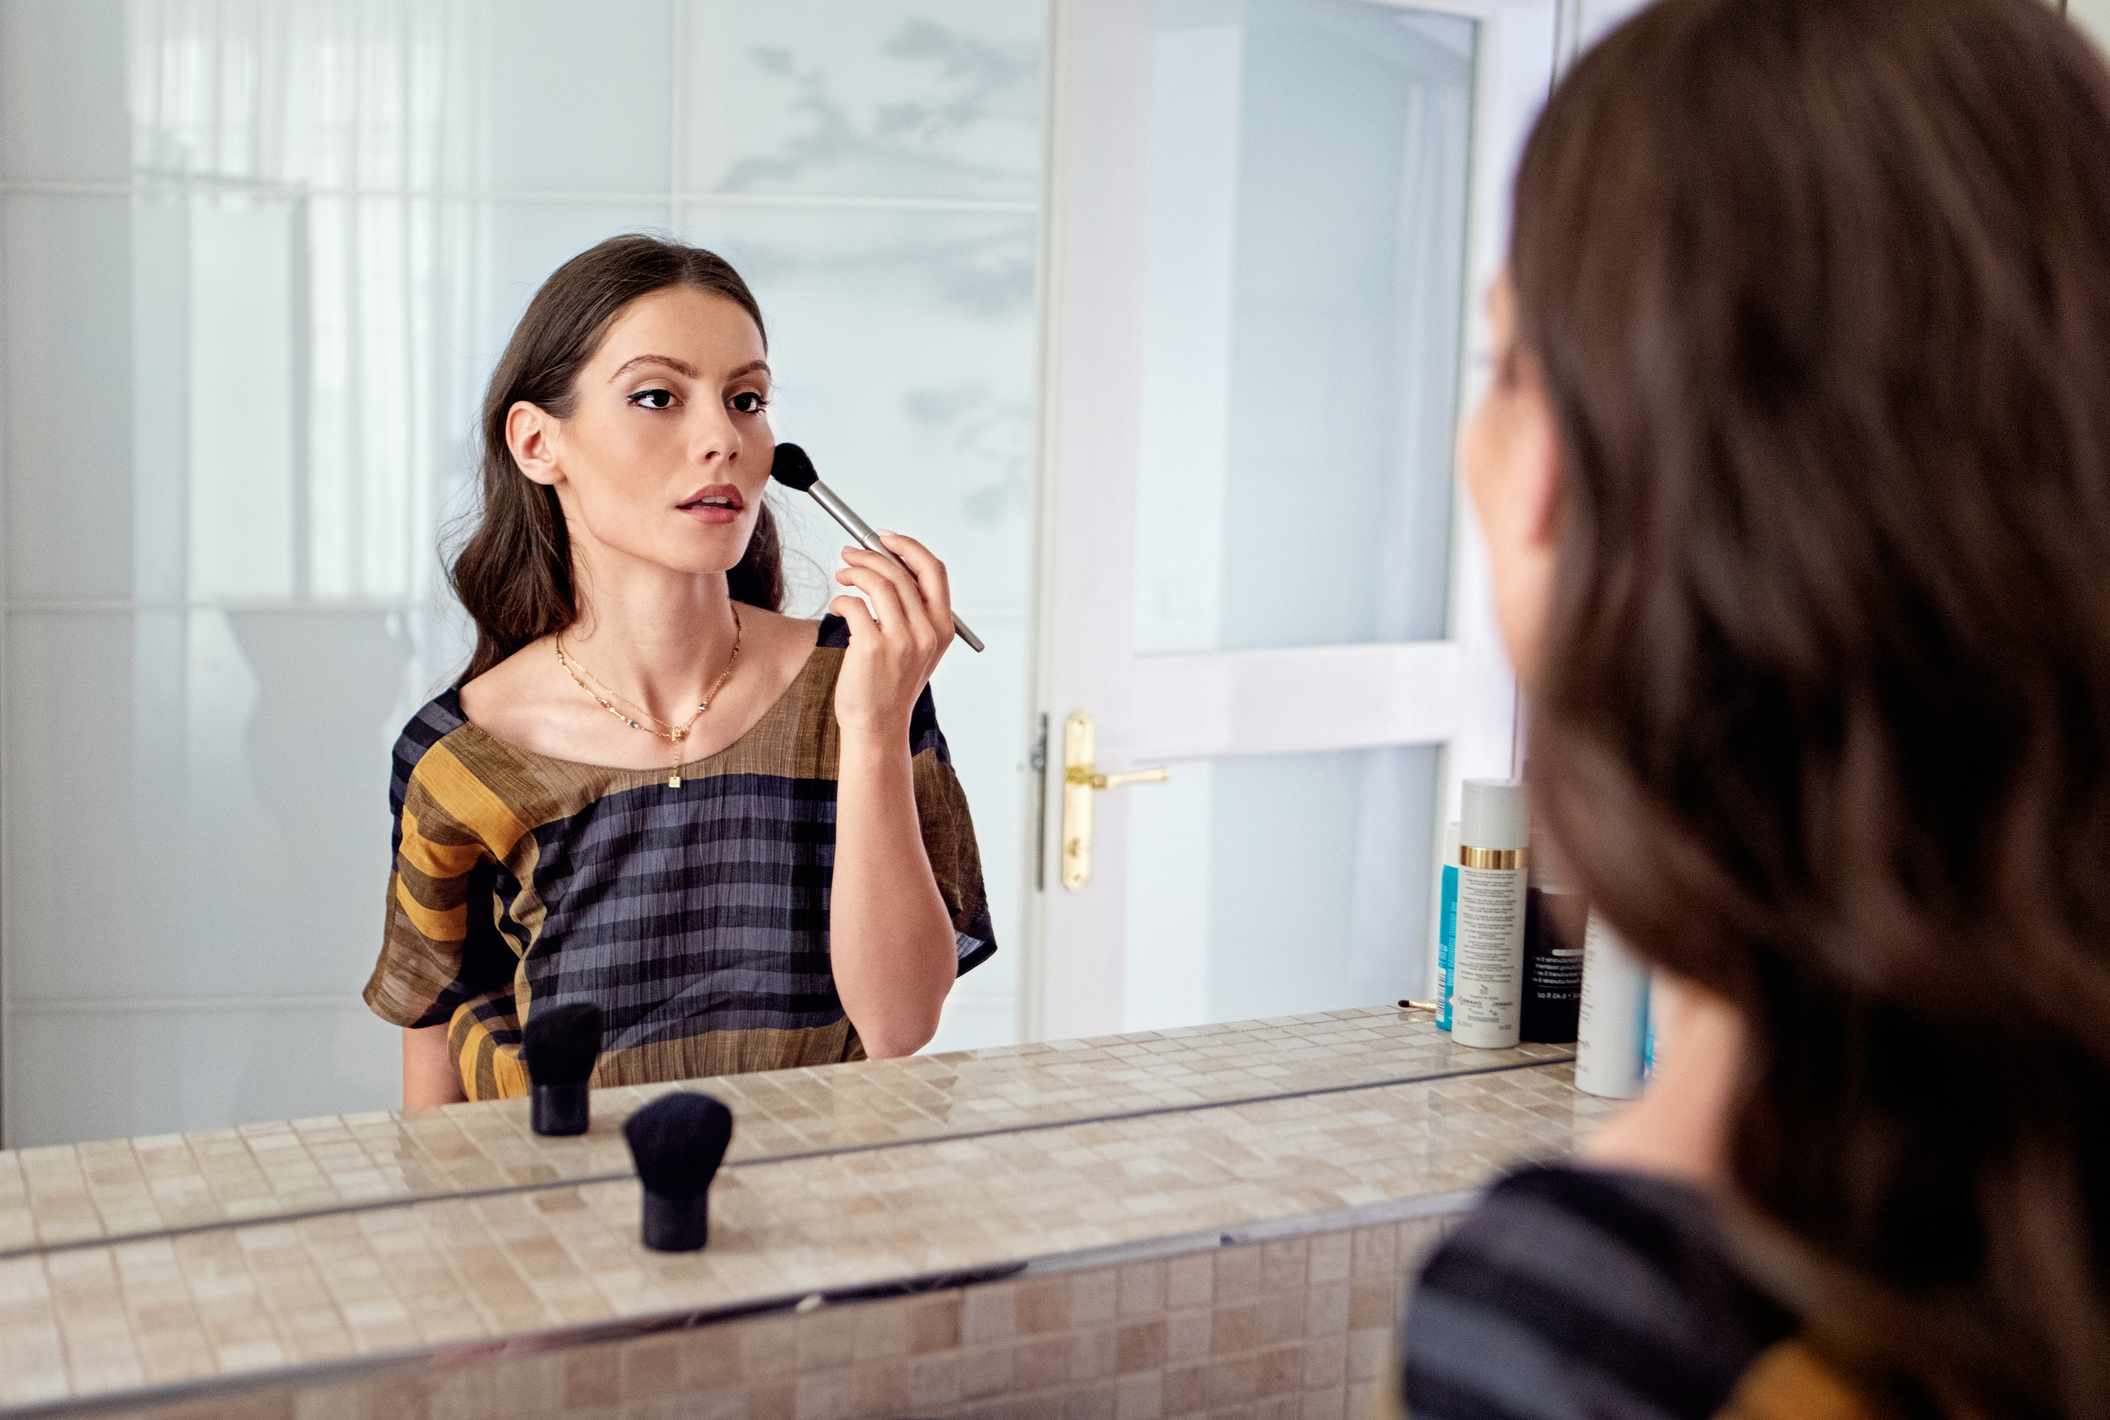 A woman applying makeup in front of a mirror